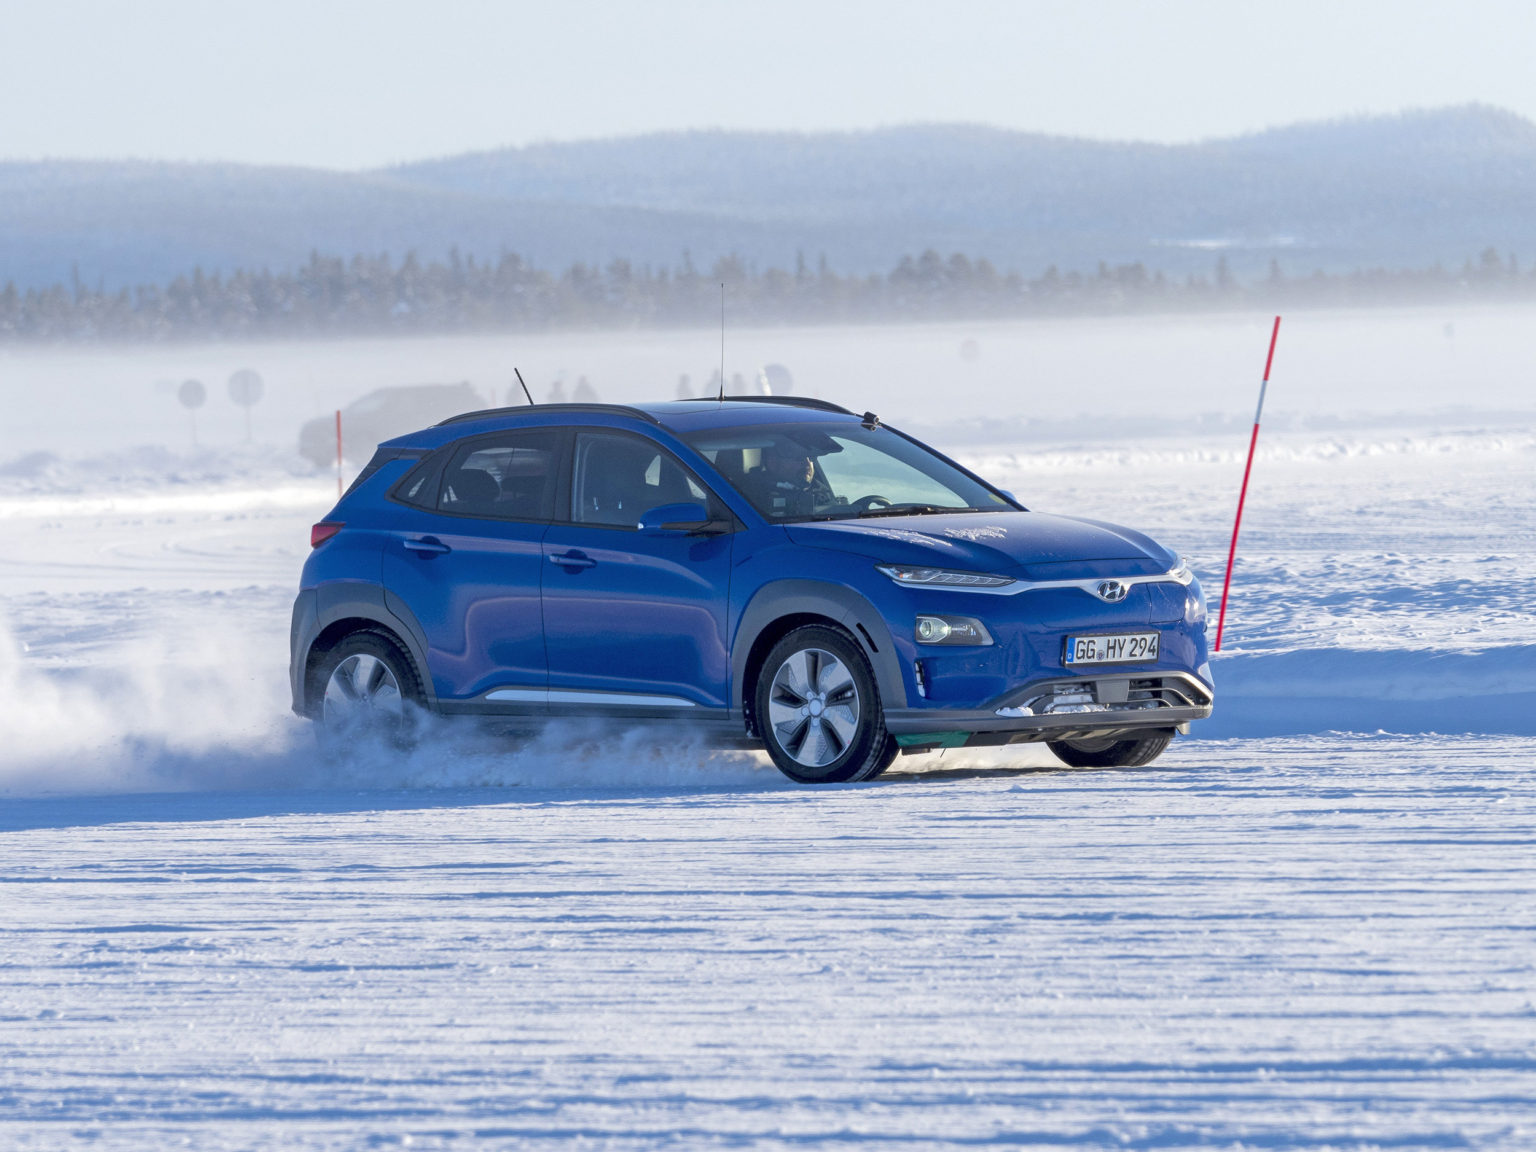 Hyundai tested the model in the snow before ever sending it to dealerships.